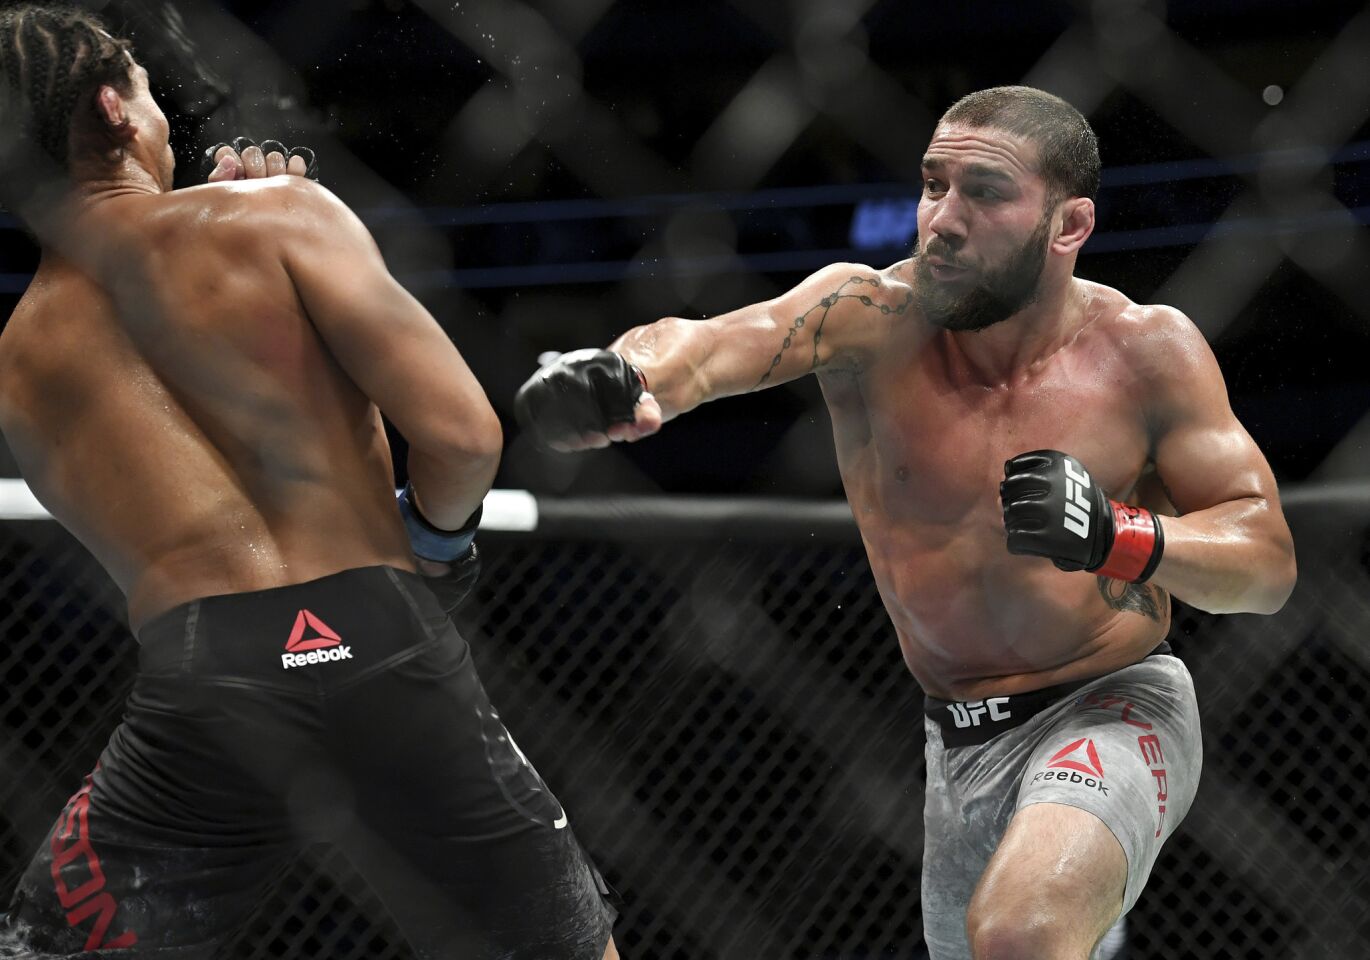 Jimmie Rivera, right, throws a punch at John Dodson during their bantamweight mixed martial arts bout at UFC 228 on Saturday, Sept. 8, 2018, in Dallas. (AP Photo/Jeffrey McWhorter)